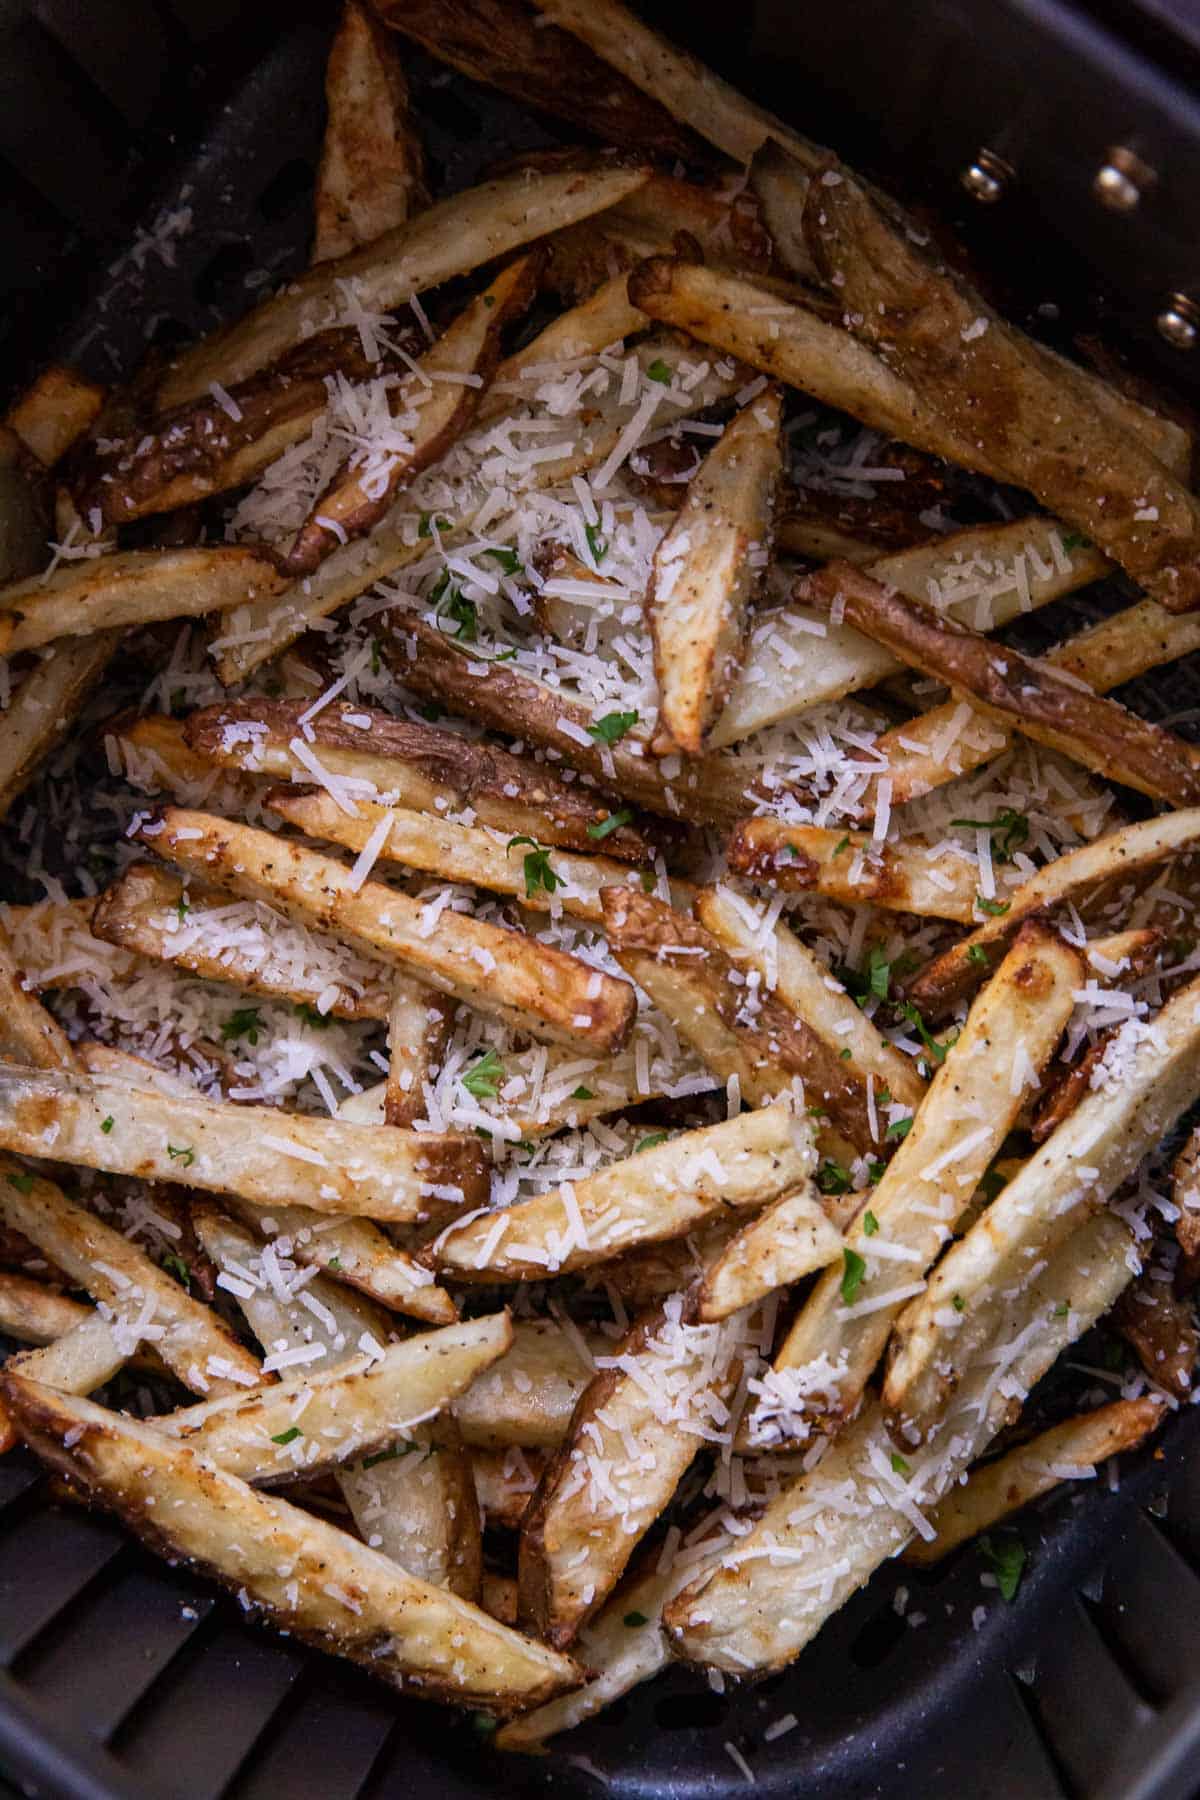 Golden fries n the basket sprinkled with cheese and minced parsley. 